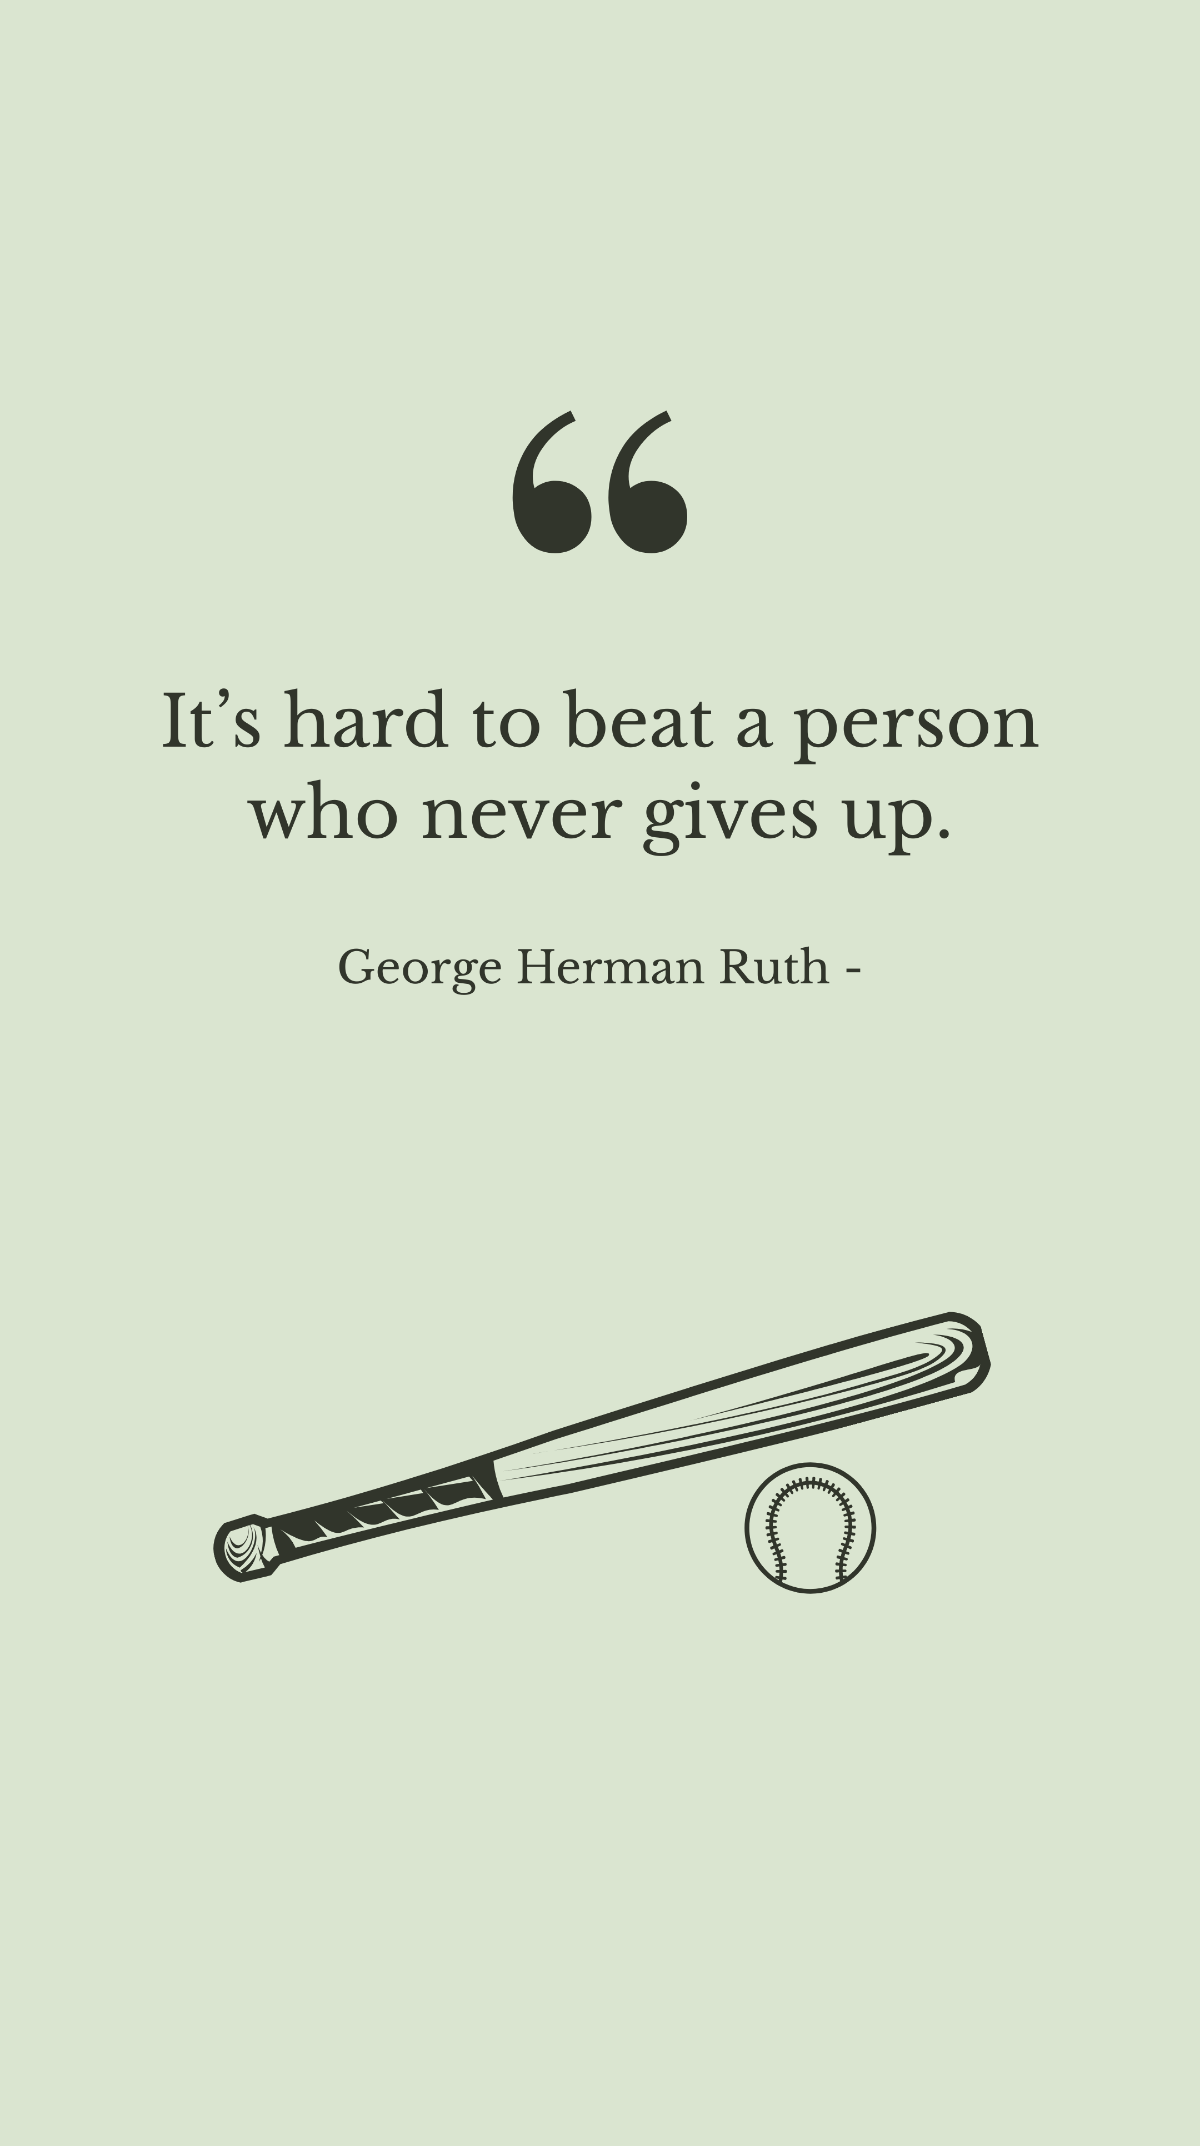 George Herman Ruth - It’s hard to beat a person who never gives up.